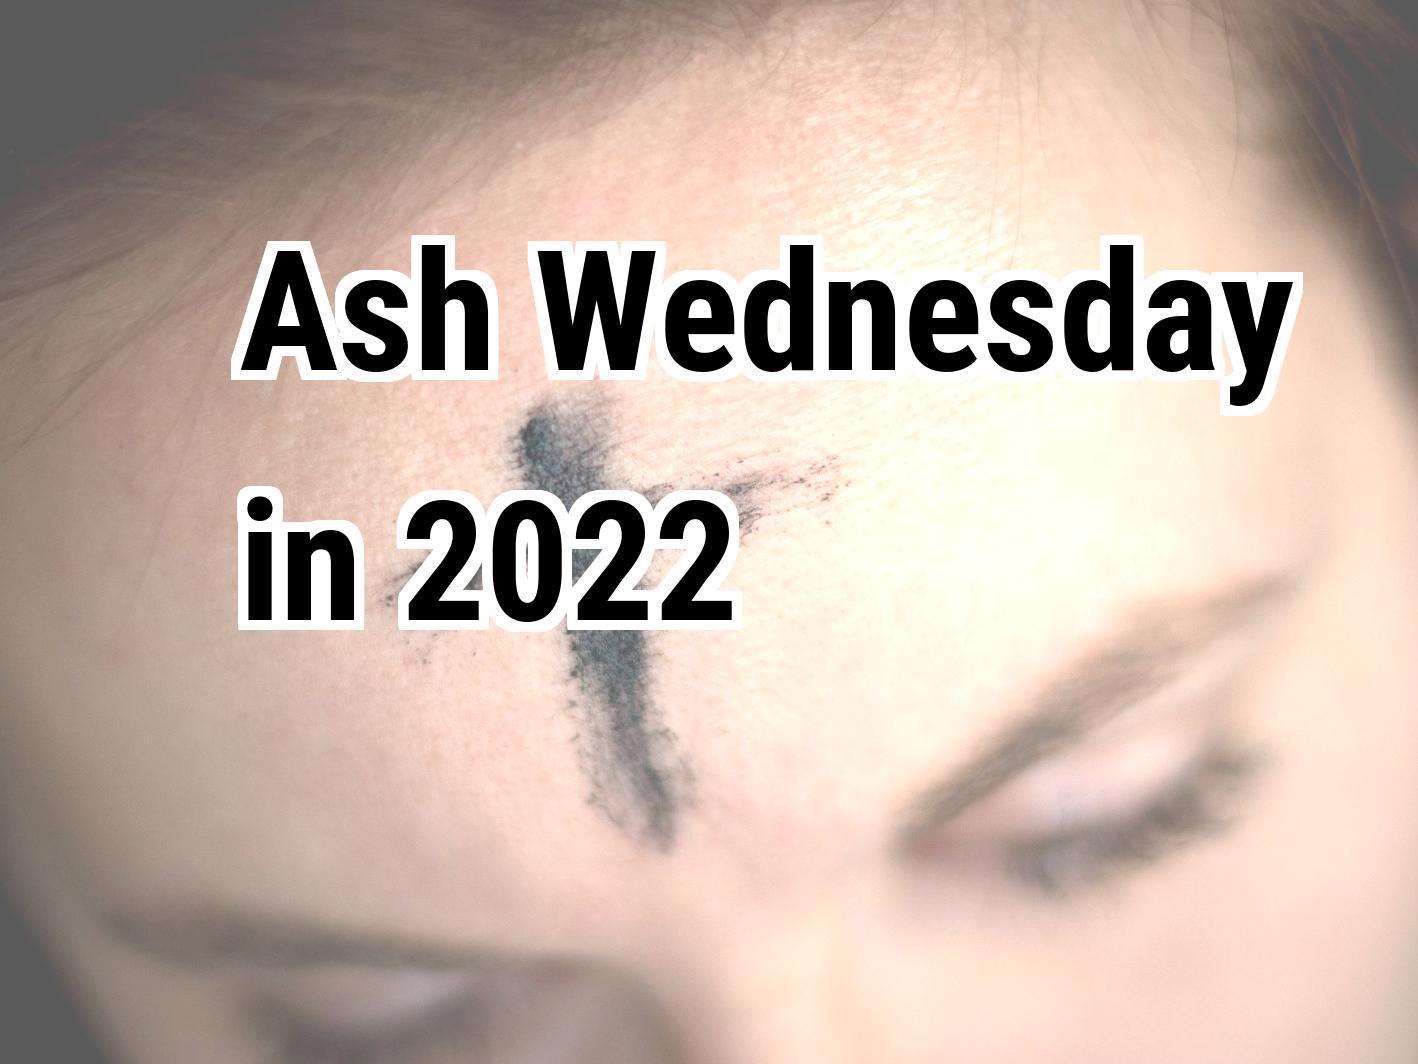 When Is Ash Wednesday 2022 6